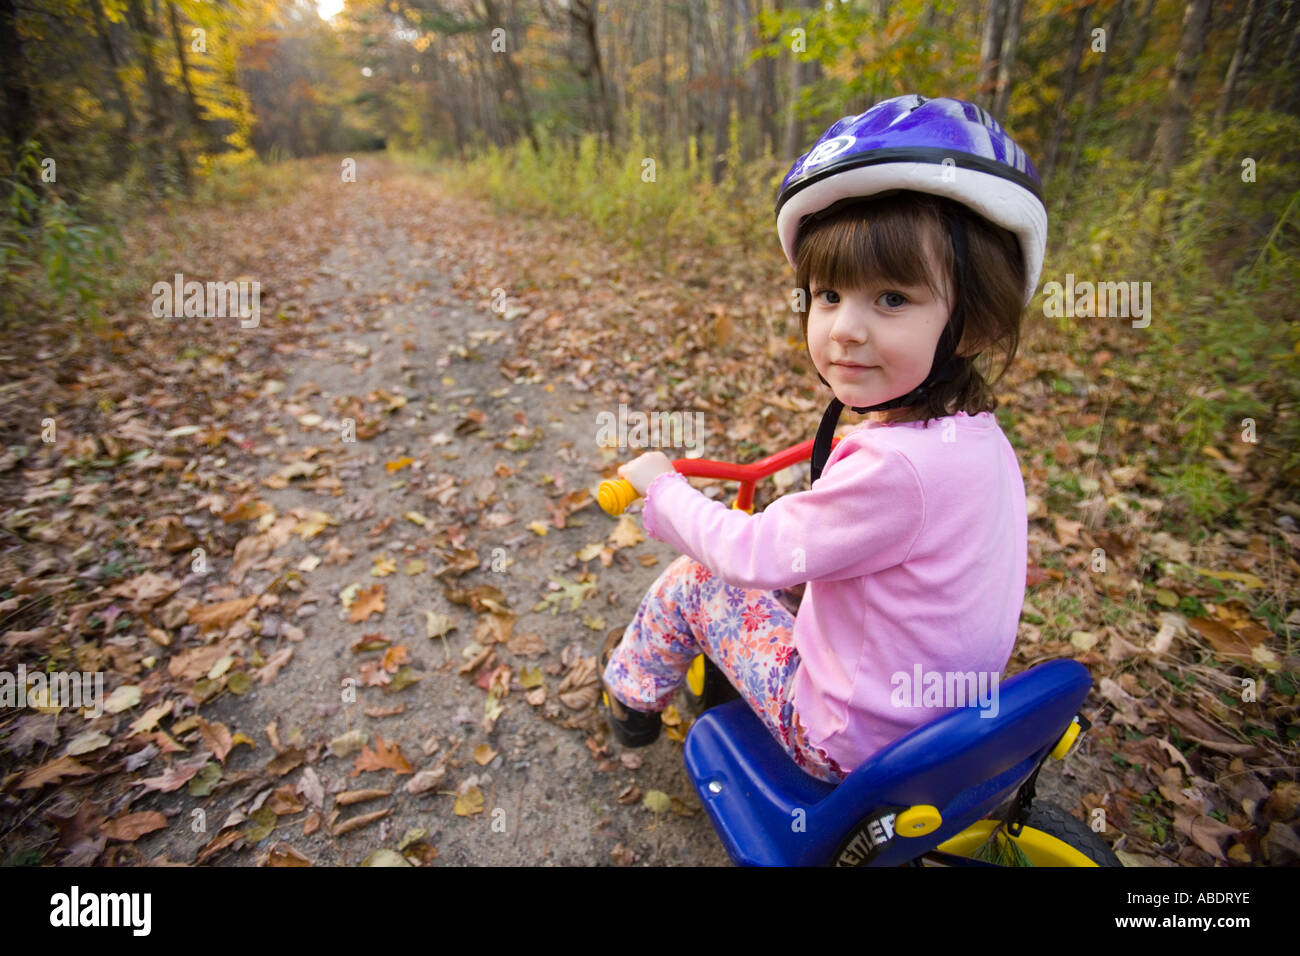 A young girl age 4 on her bike Newfields rail trail in Newfields NH Fall Stock Photo